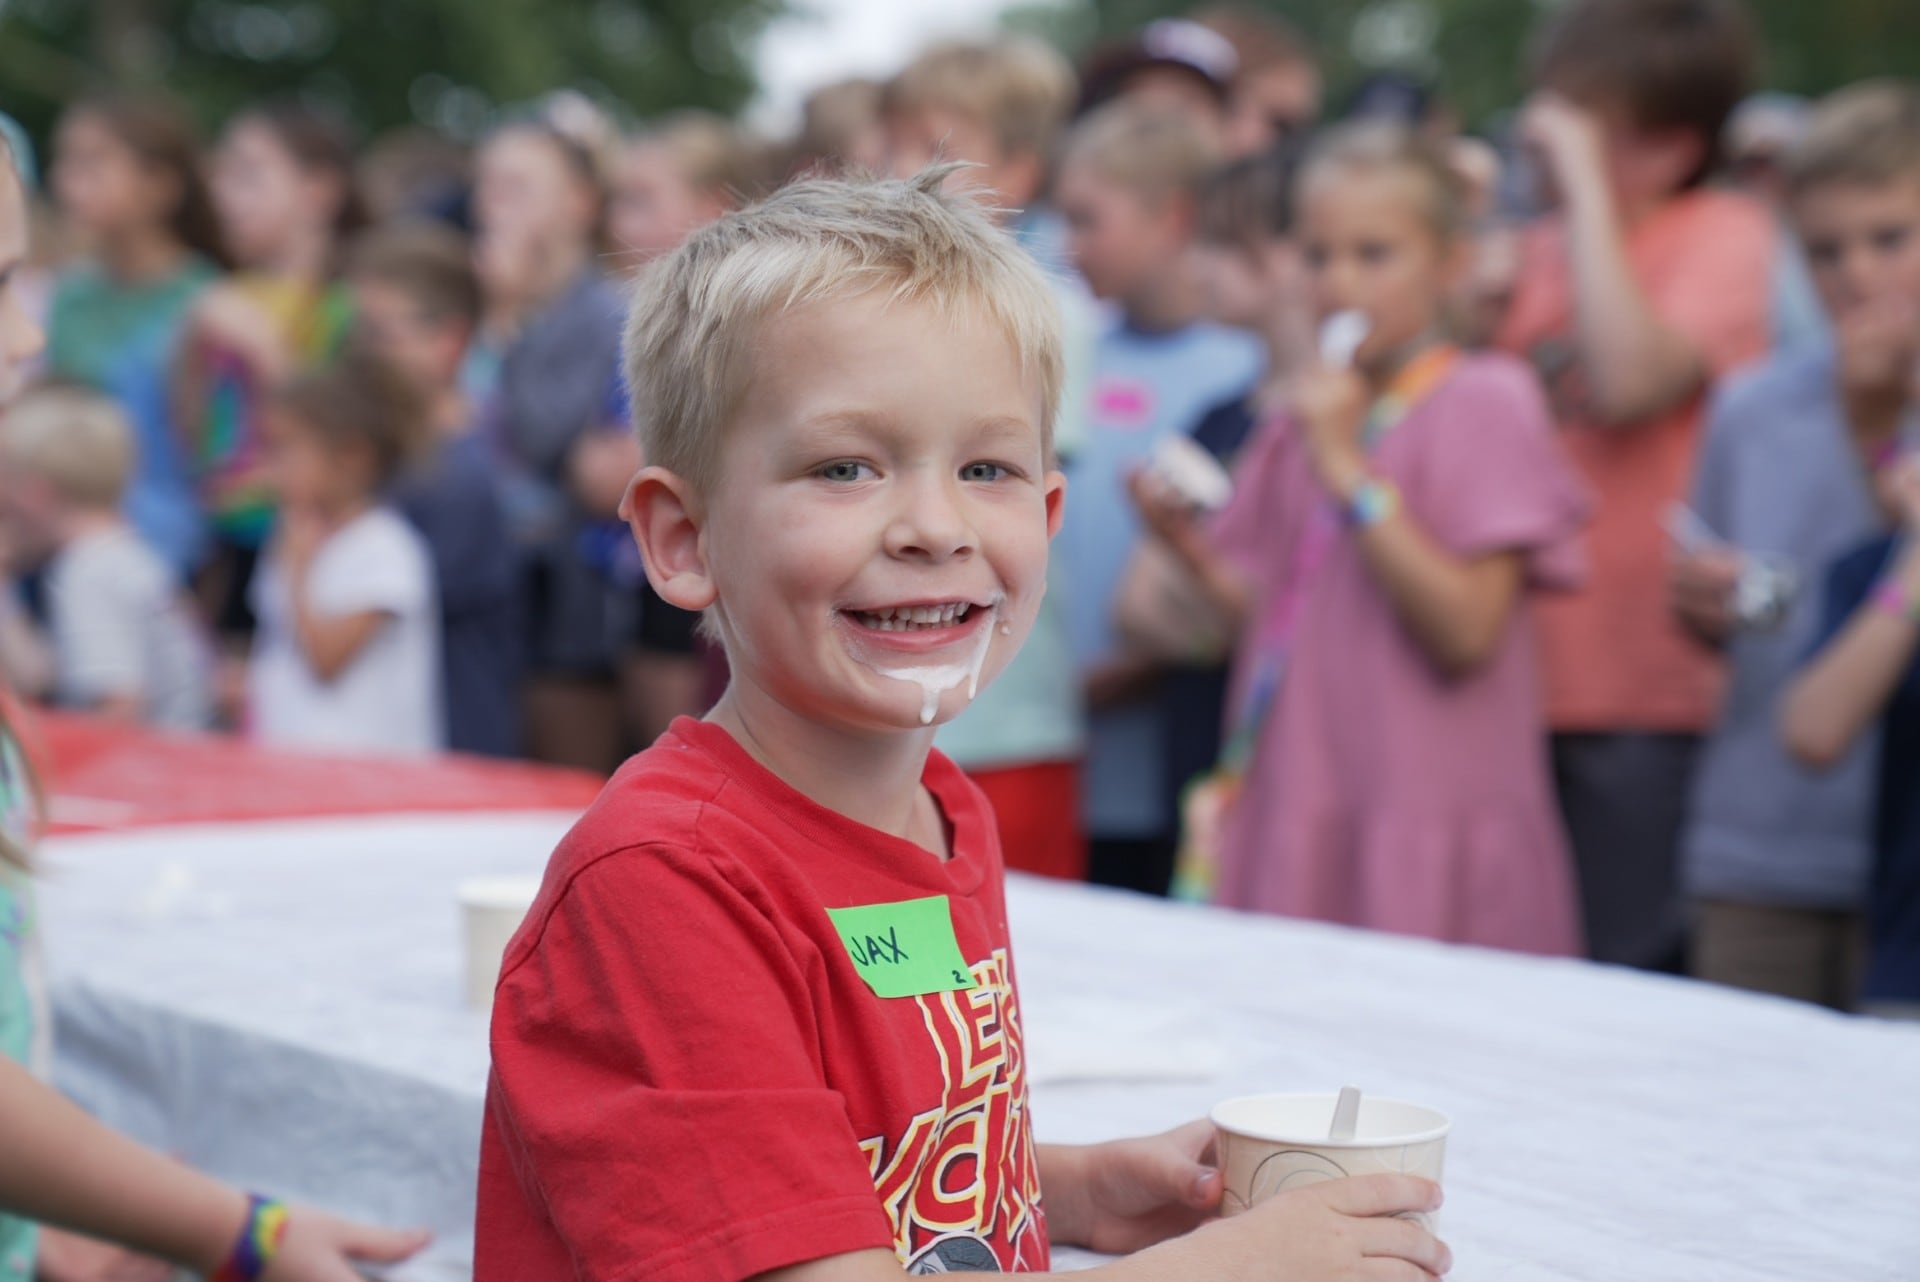 Ice Cream Fest in Crystal Lake will be ‘out of this world’